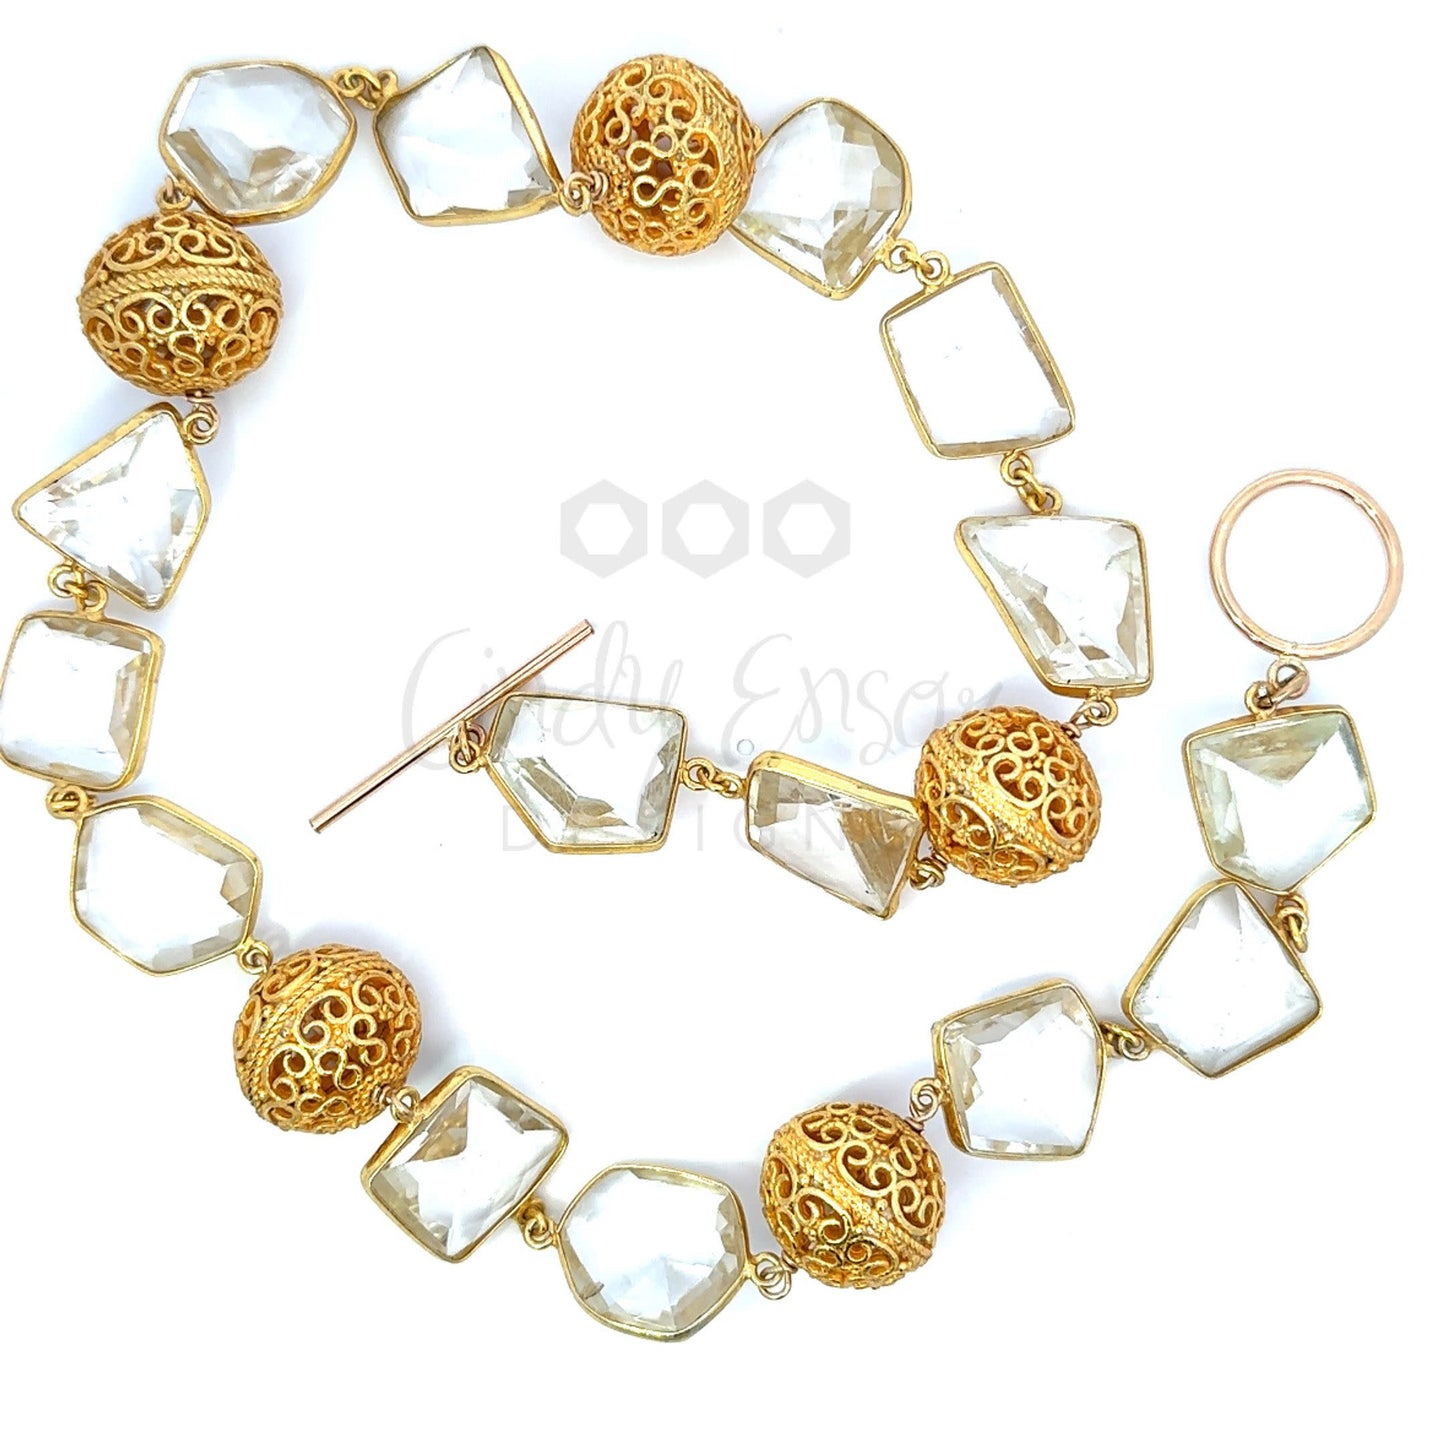 Gold Vermeil Larger Crystal Necklace with 5 Accent Beads